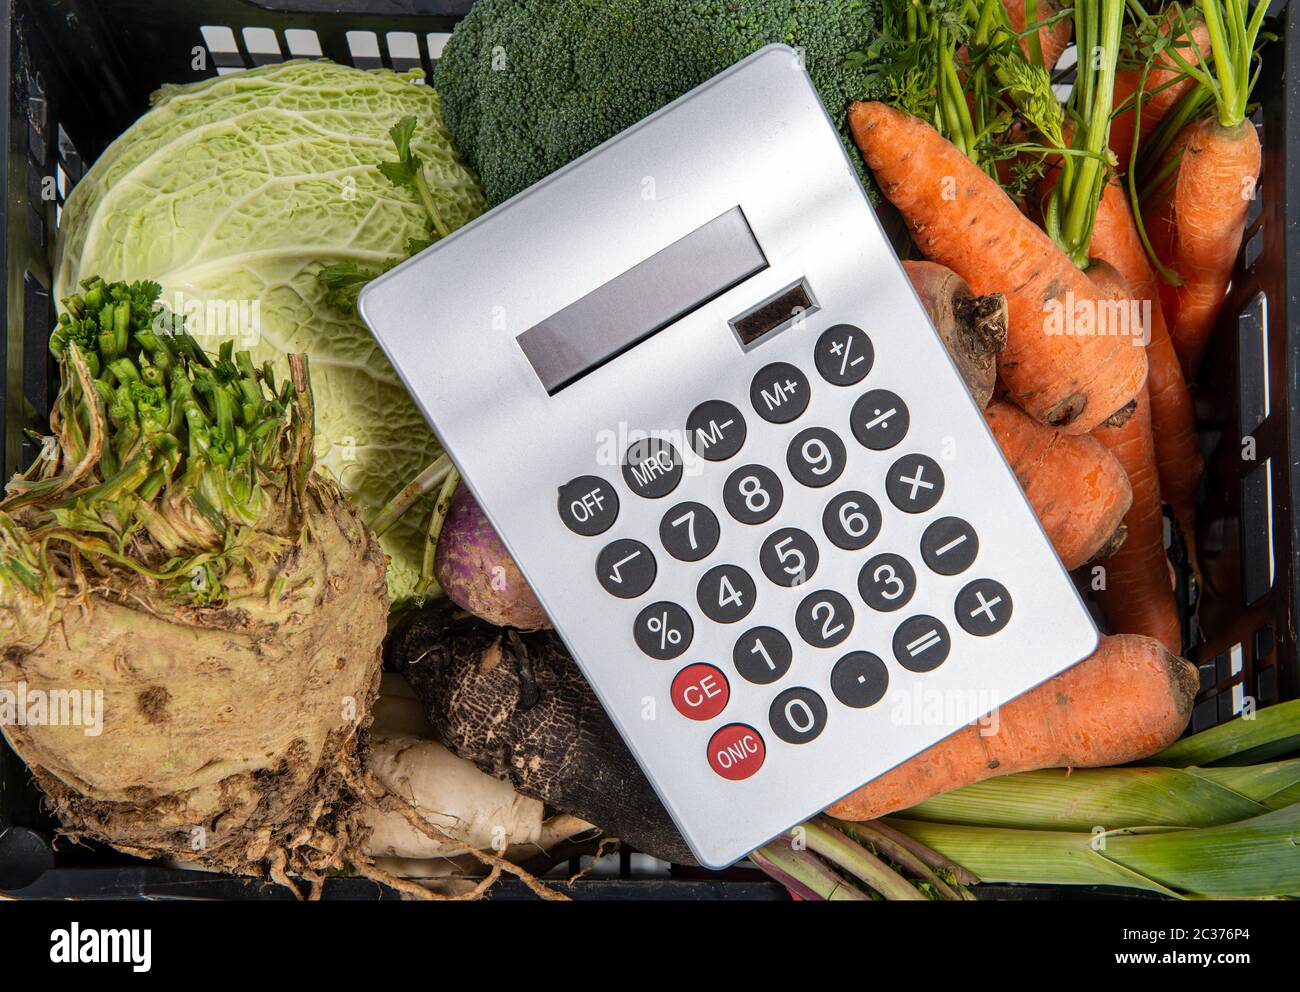 The high prices of vegetables, calculator Stock Photo